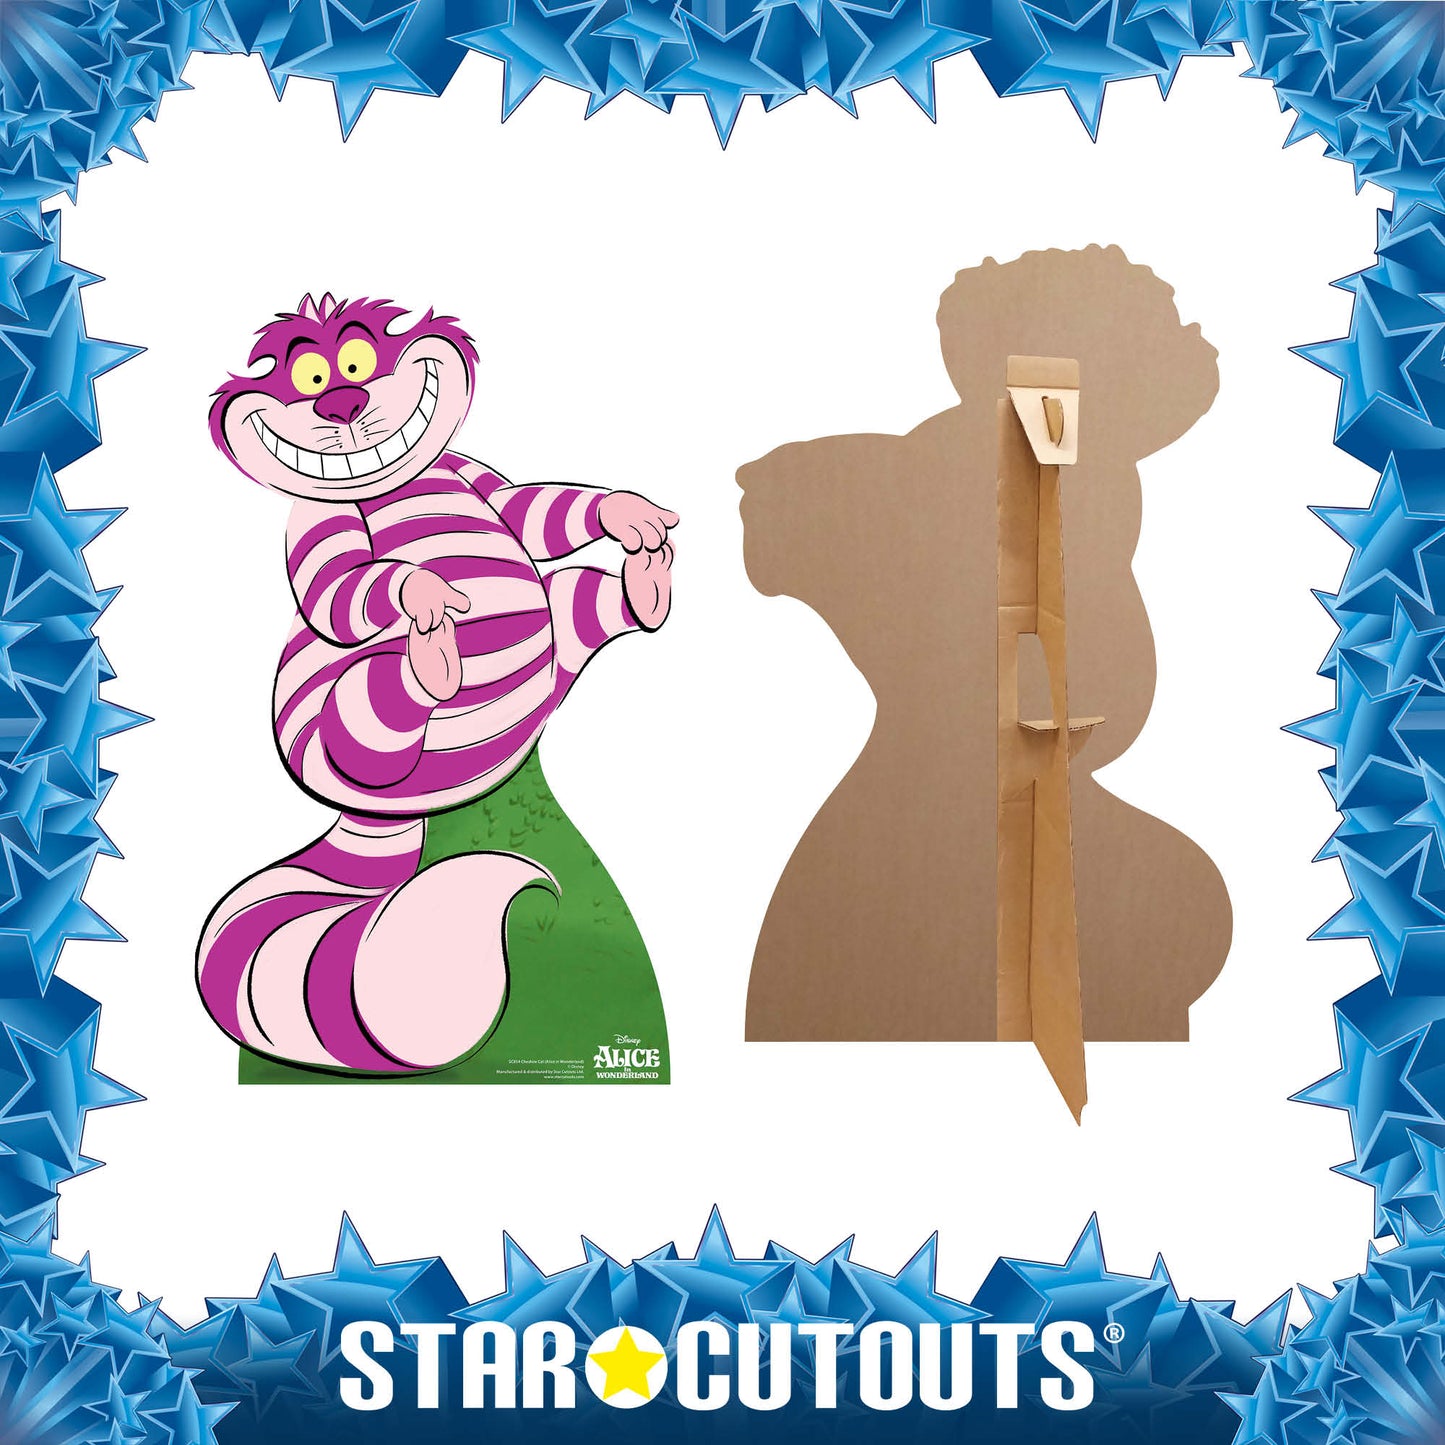 SC854 Cheshire Cat Classic Alice in Wonderland Cardboard Cut Out Height 93cm - Star Cutouts